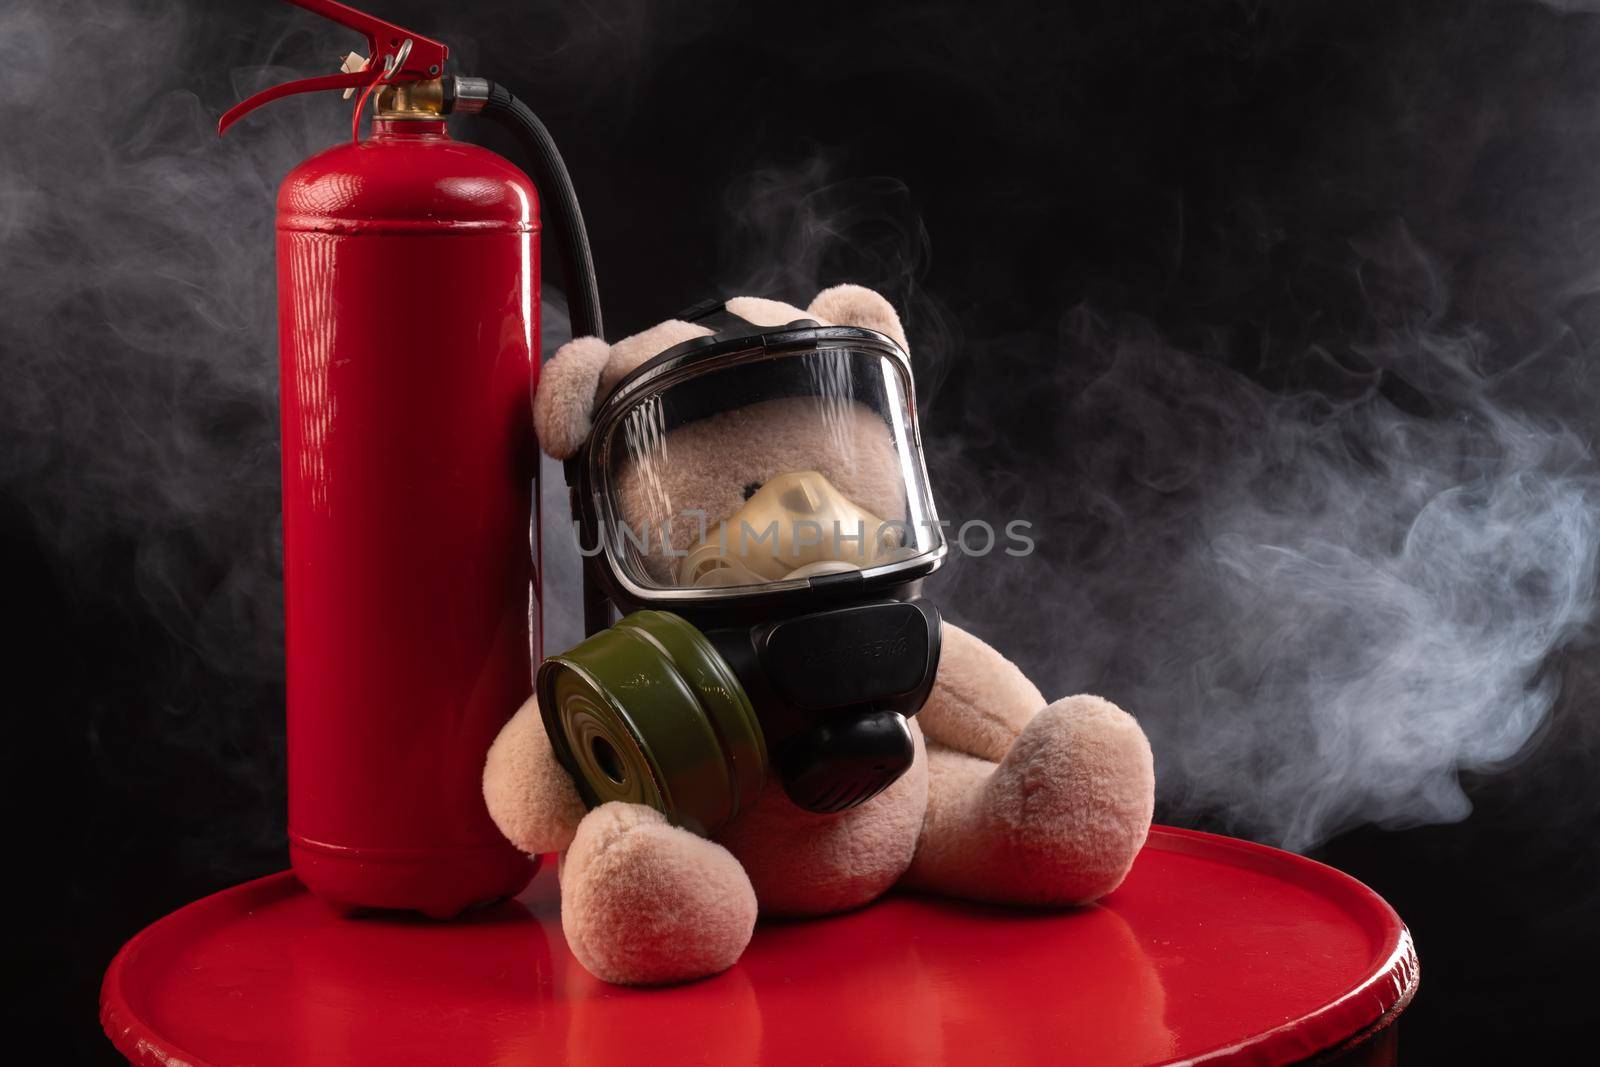 mascot of the fire brigade is a teddy bear in a gas mask with a fire extinguisher in smoke on a dark background